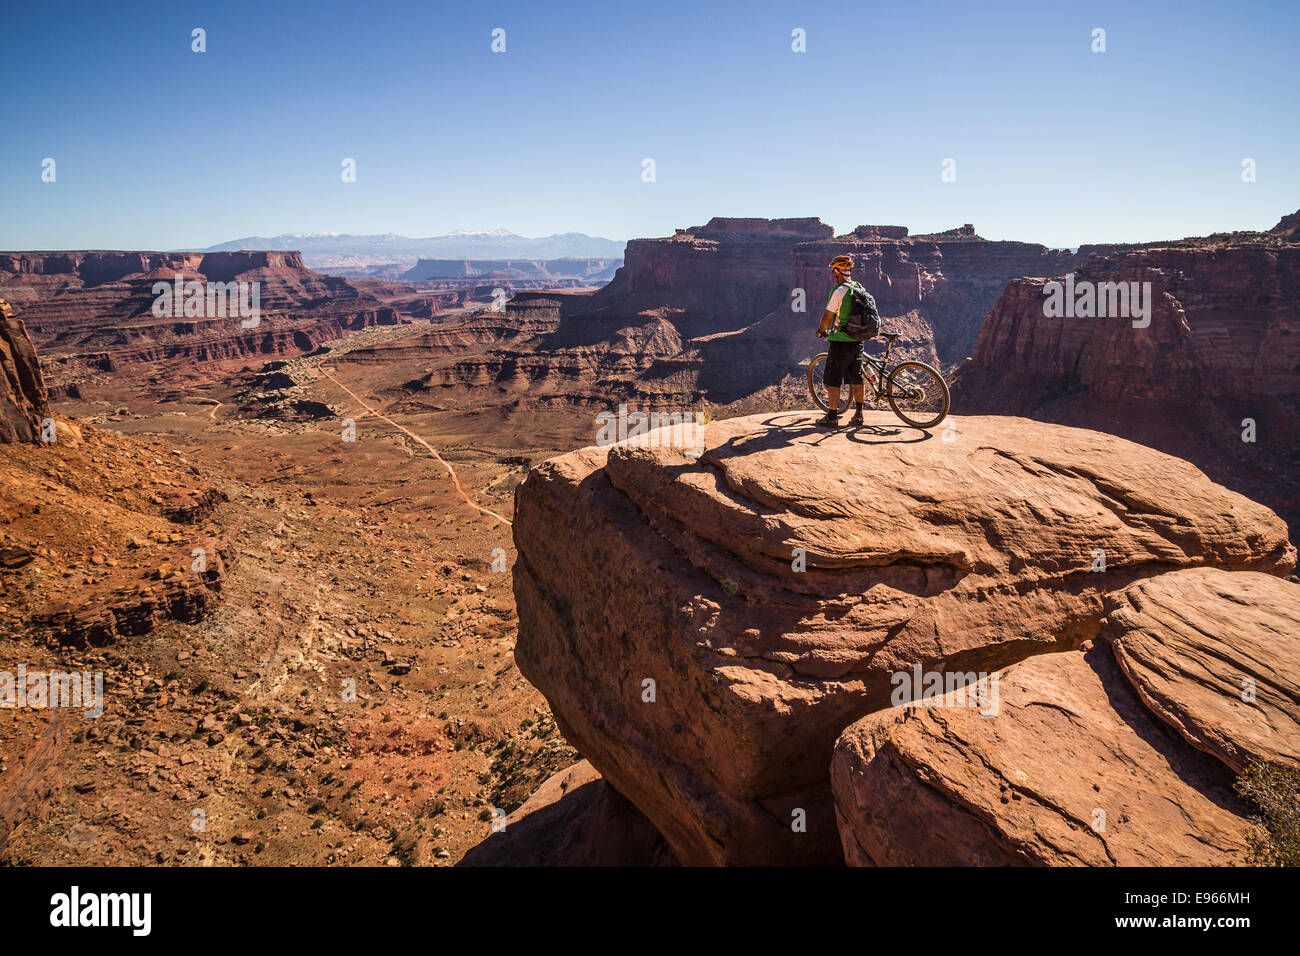 Whit Richardson stand with his mountain bike overlooking Shafer Canyon on the White Rim trail, Canyonlands National Park, Moab, Stock Photo